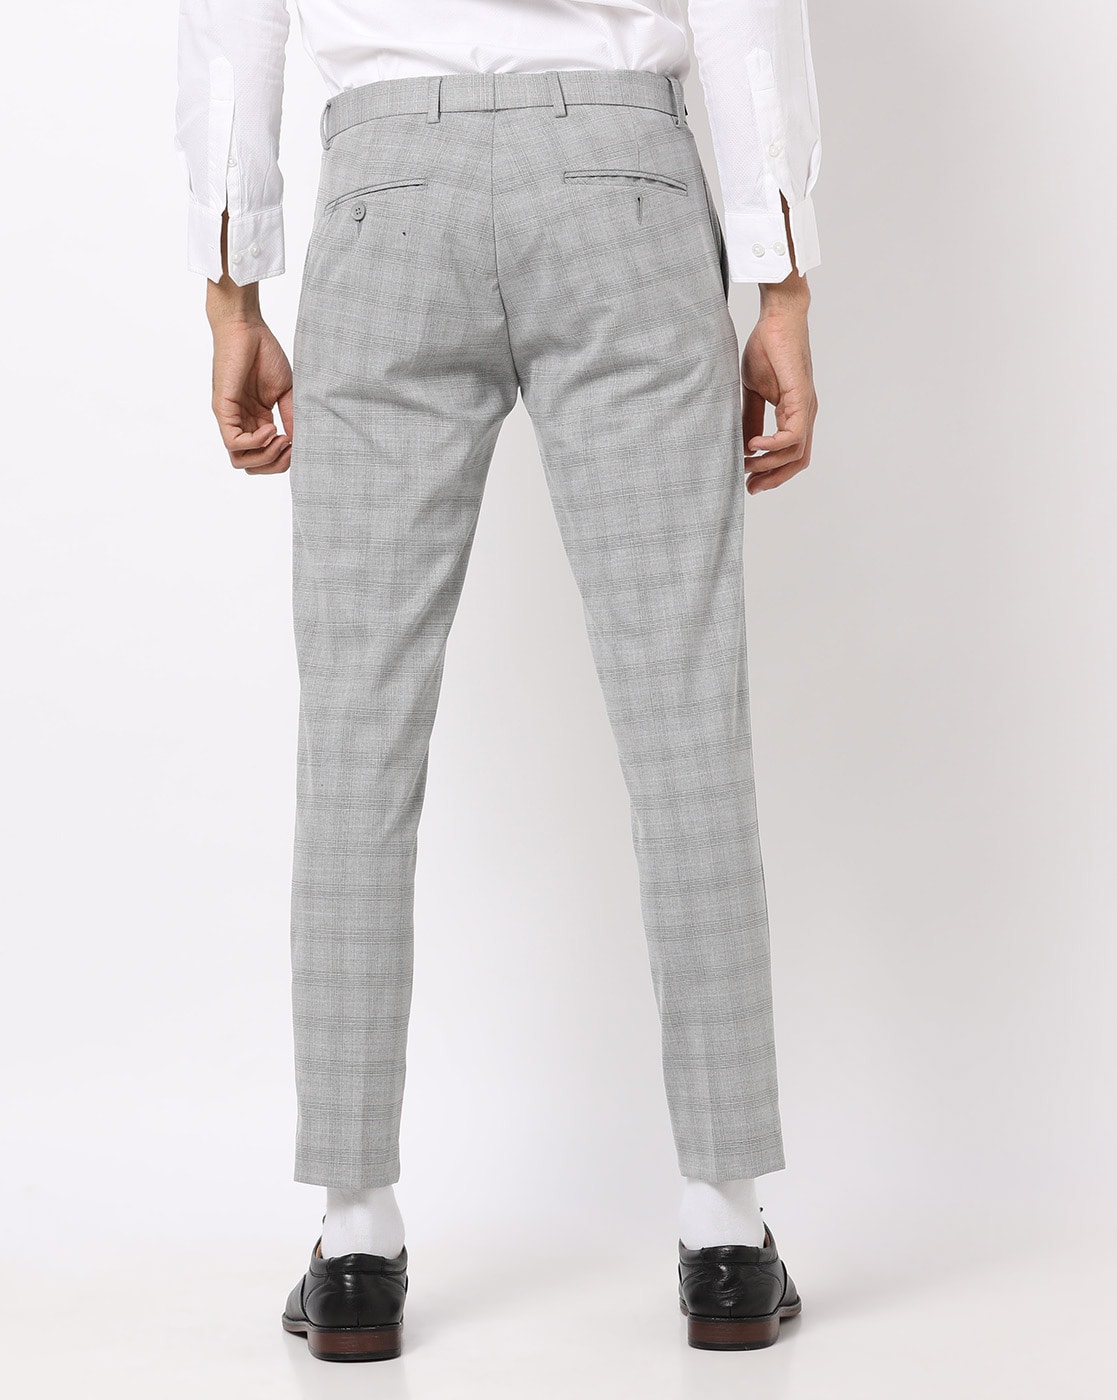 Buy TURTLE Mens Ultra Slim Fit Checks Trousers  Shoppers Stop